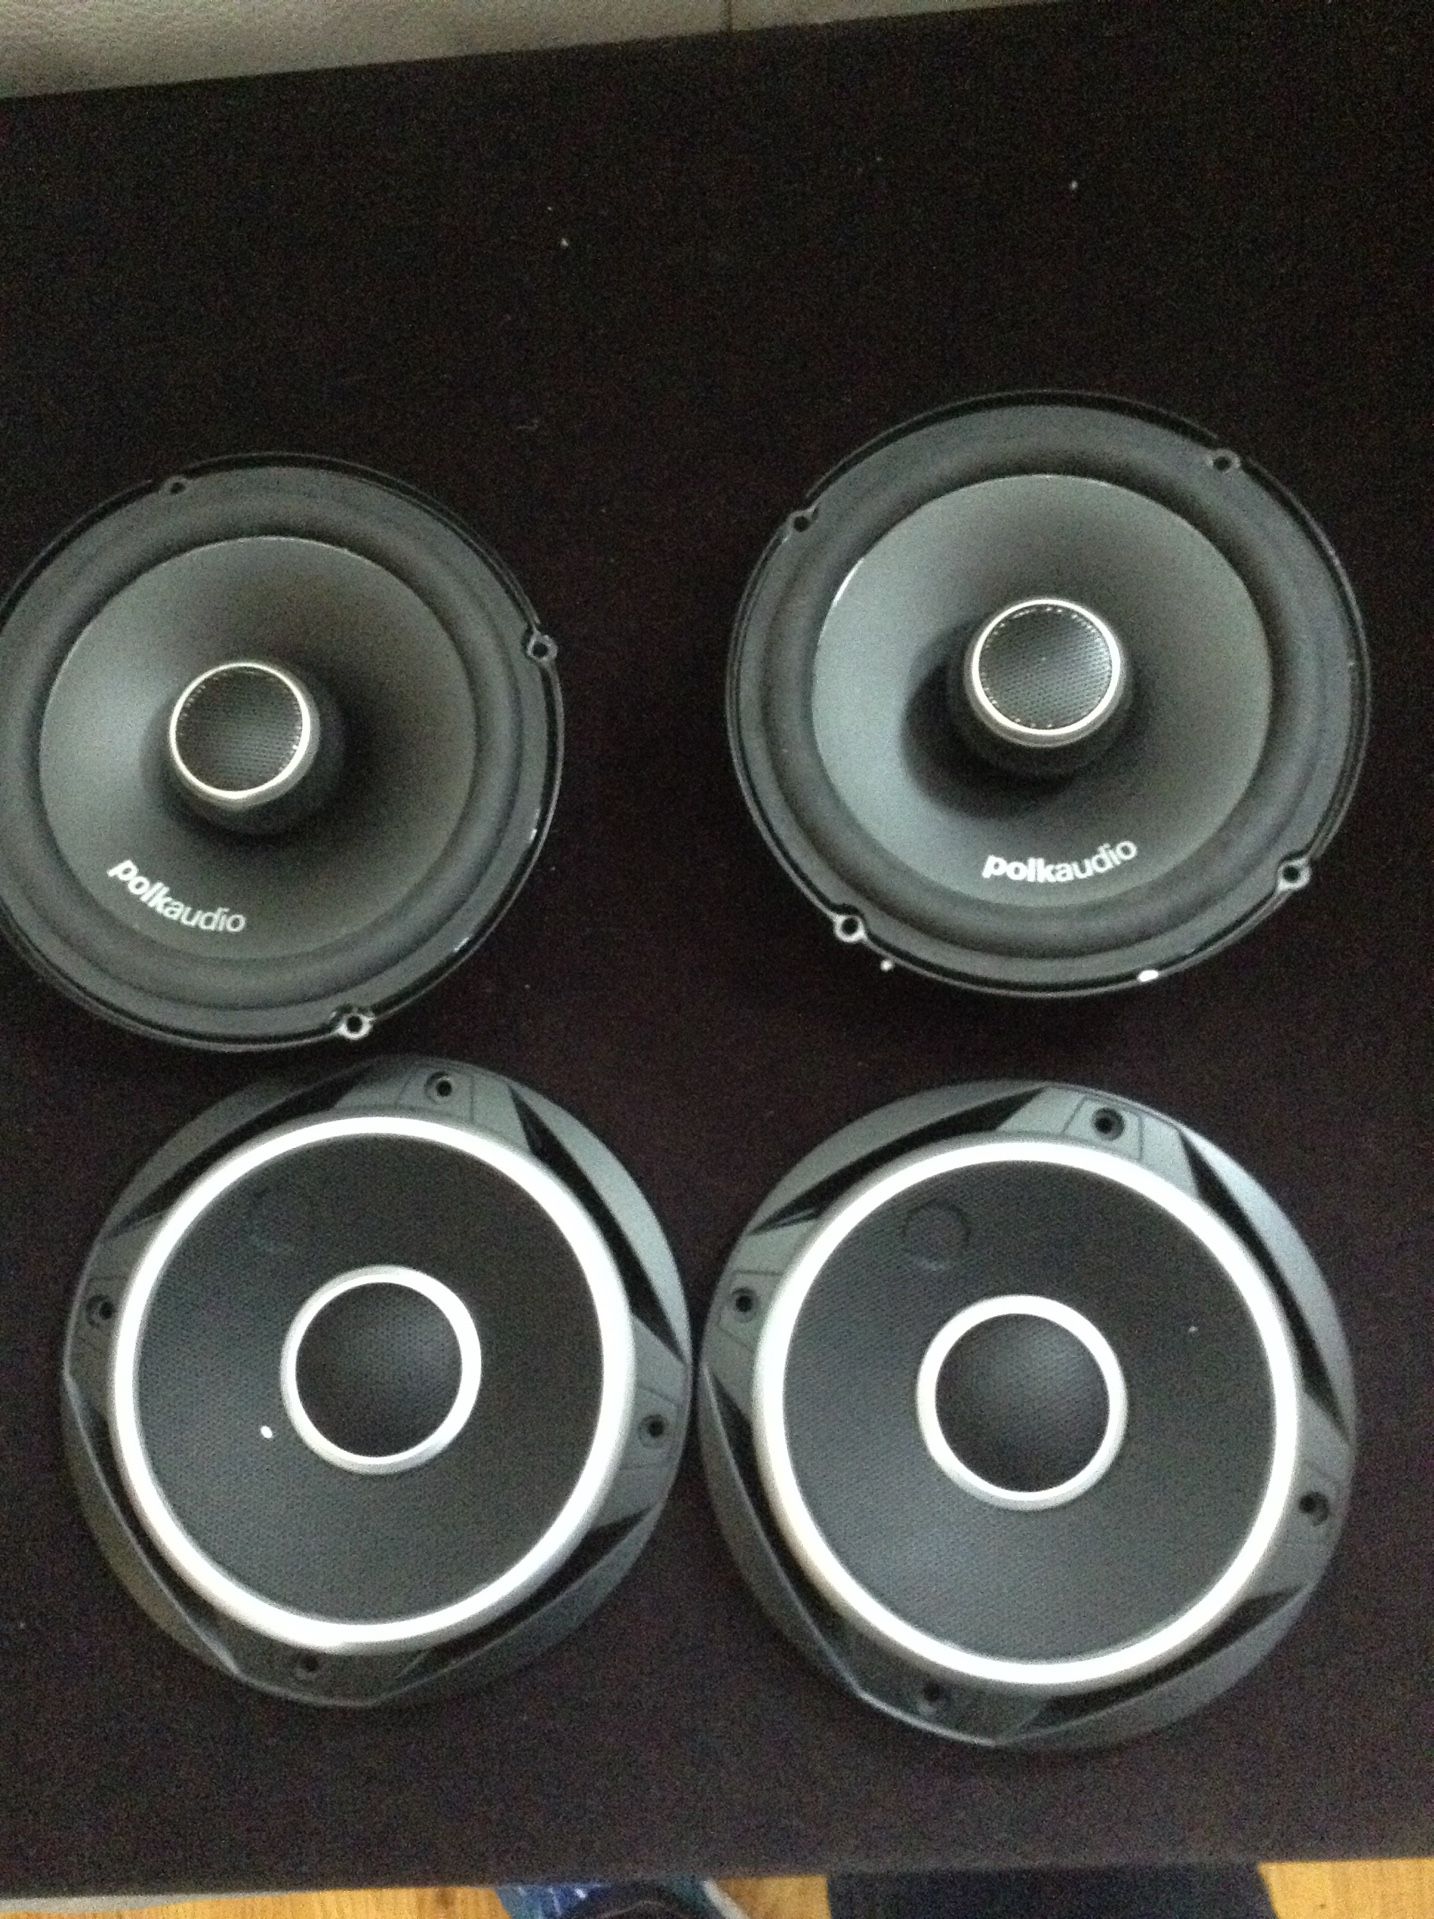 Polk Audio Dxi 650 with covers 6.5". Great condition